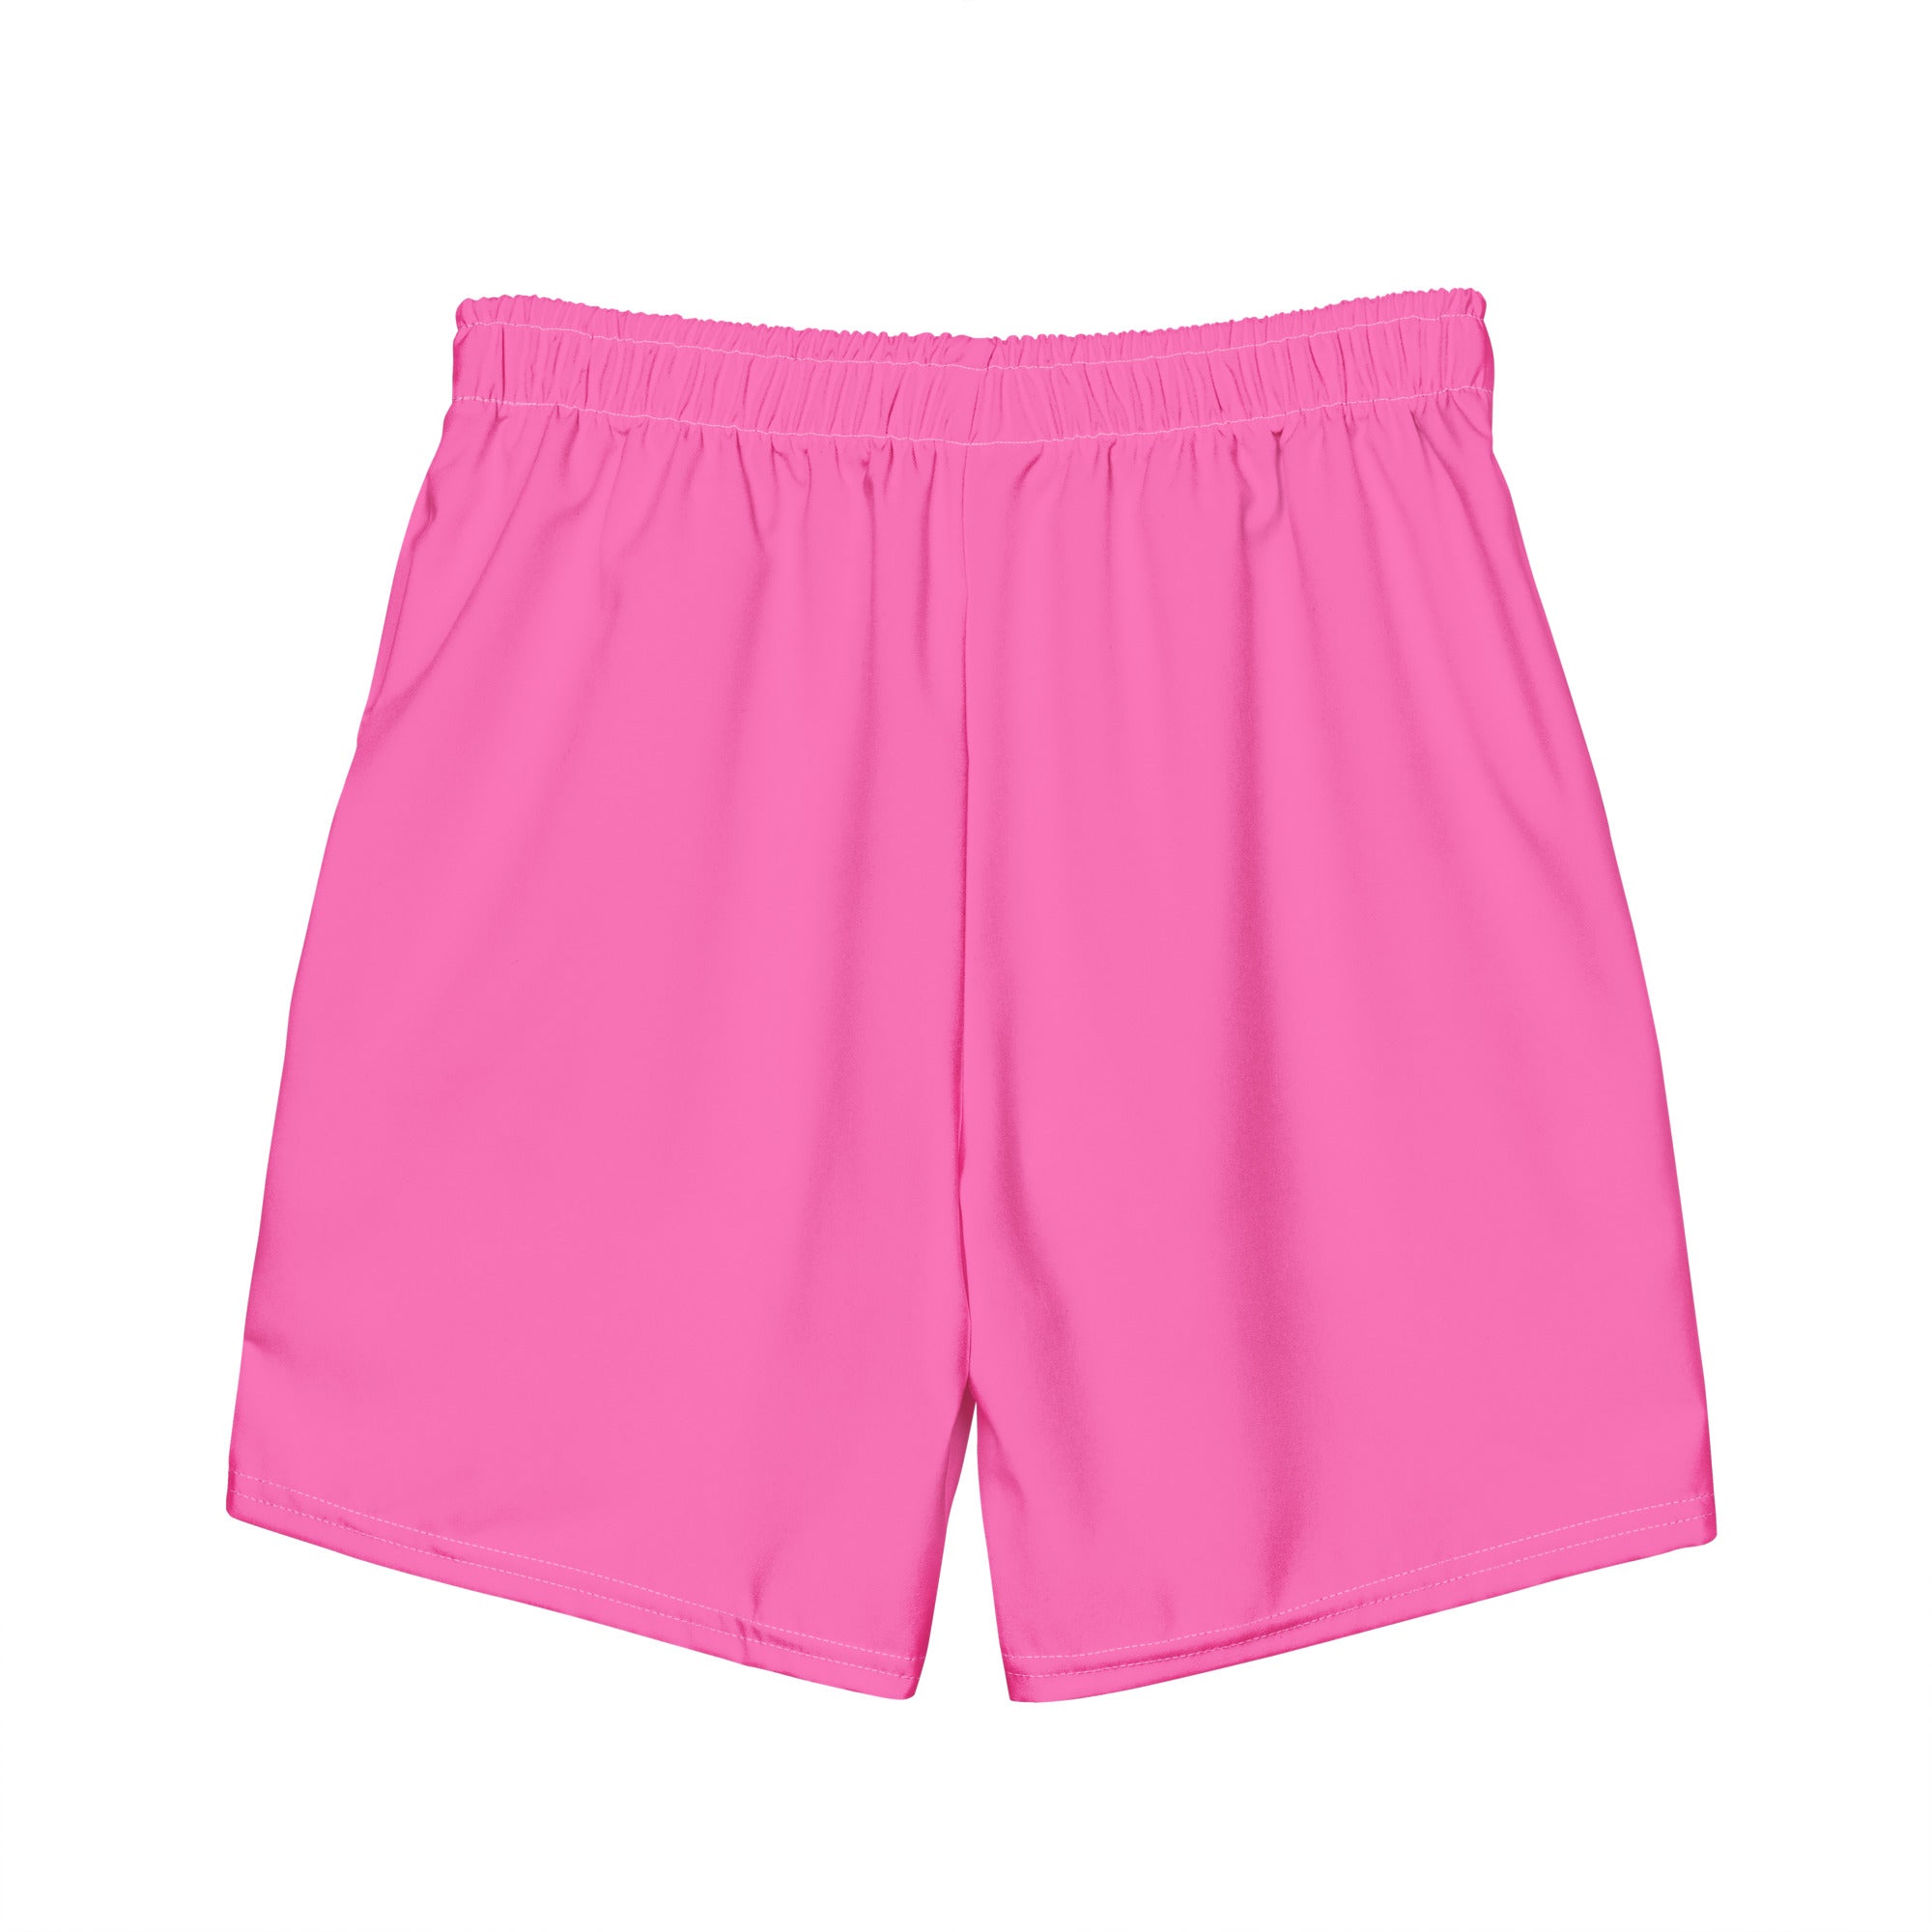 Everyday Recycled Volleys - Reverse / Neon Hot Pink